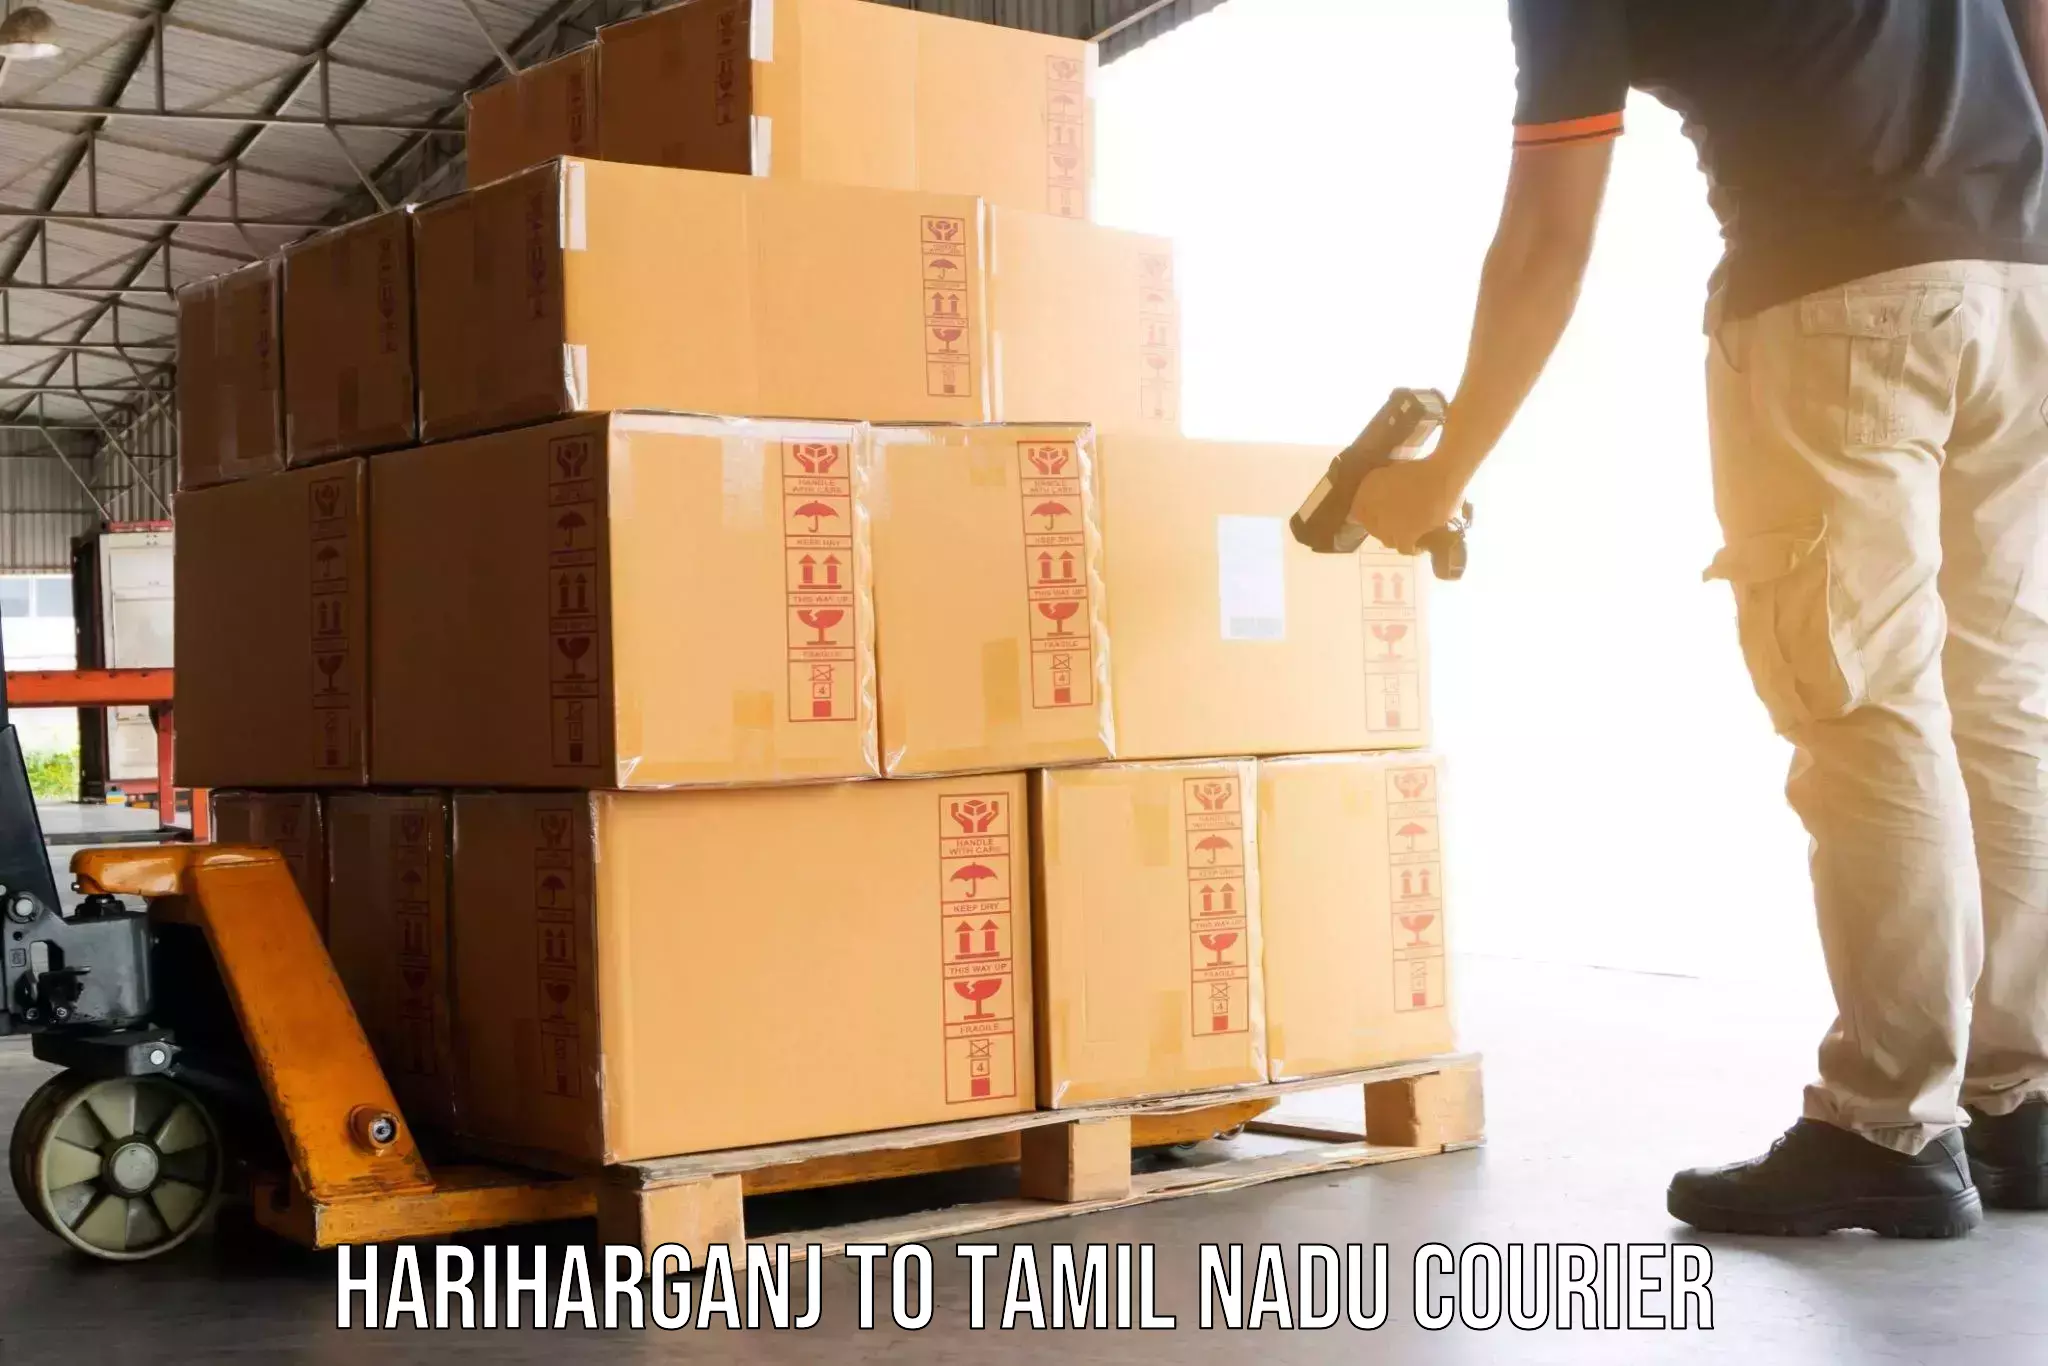 Quality relocation assistance Hariharganj to Cheyyar